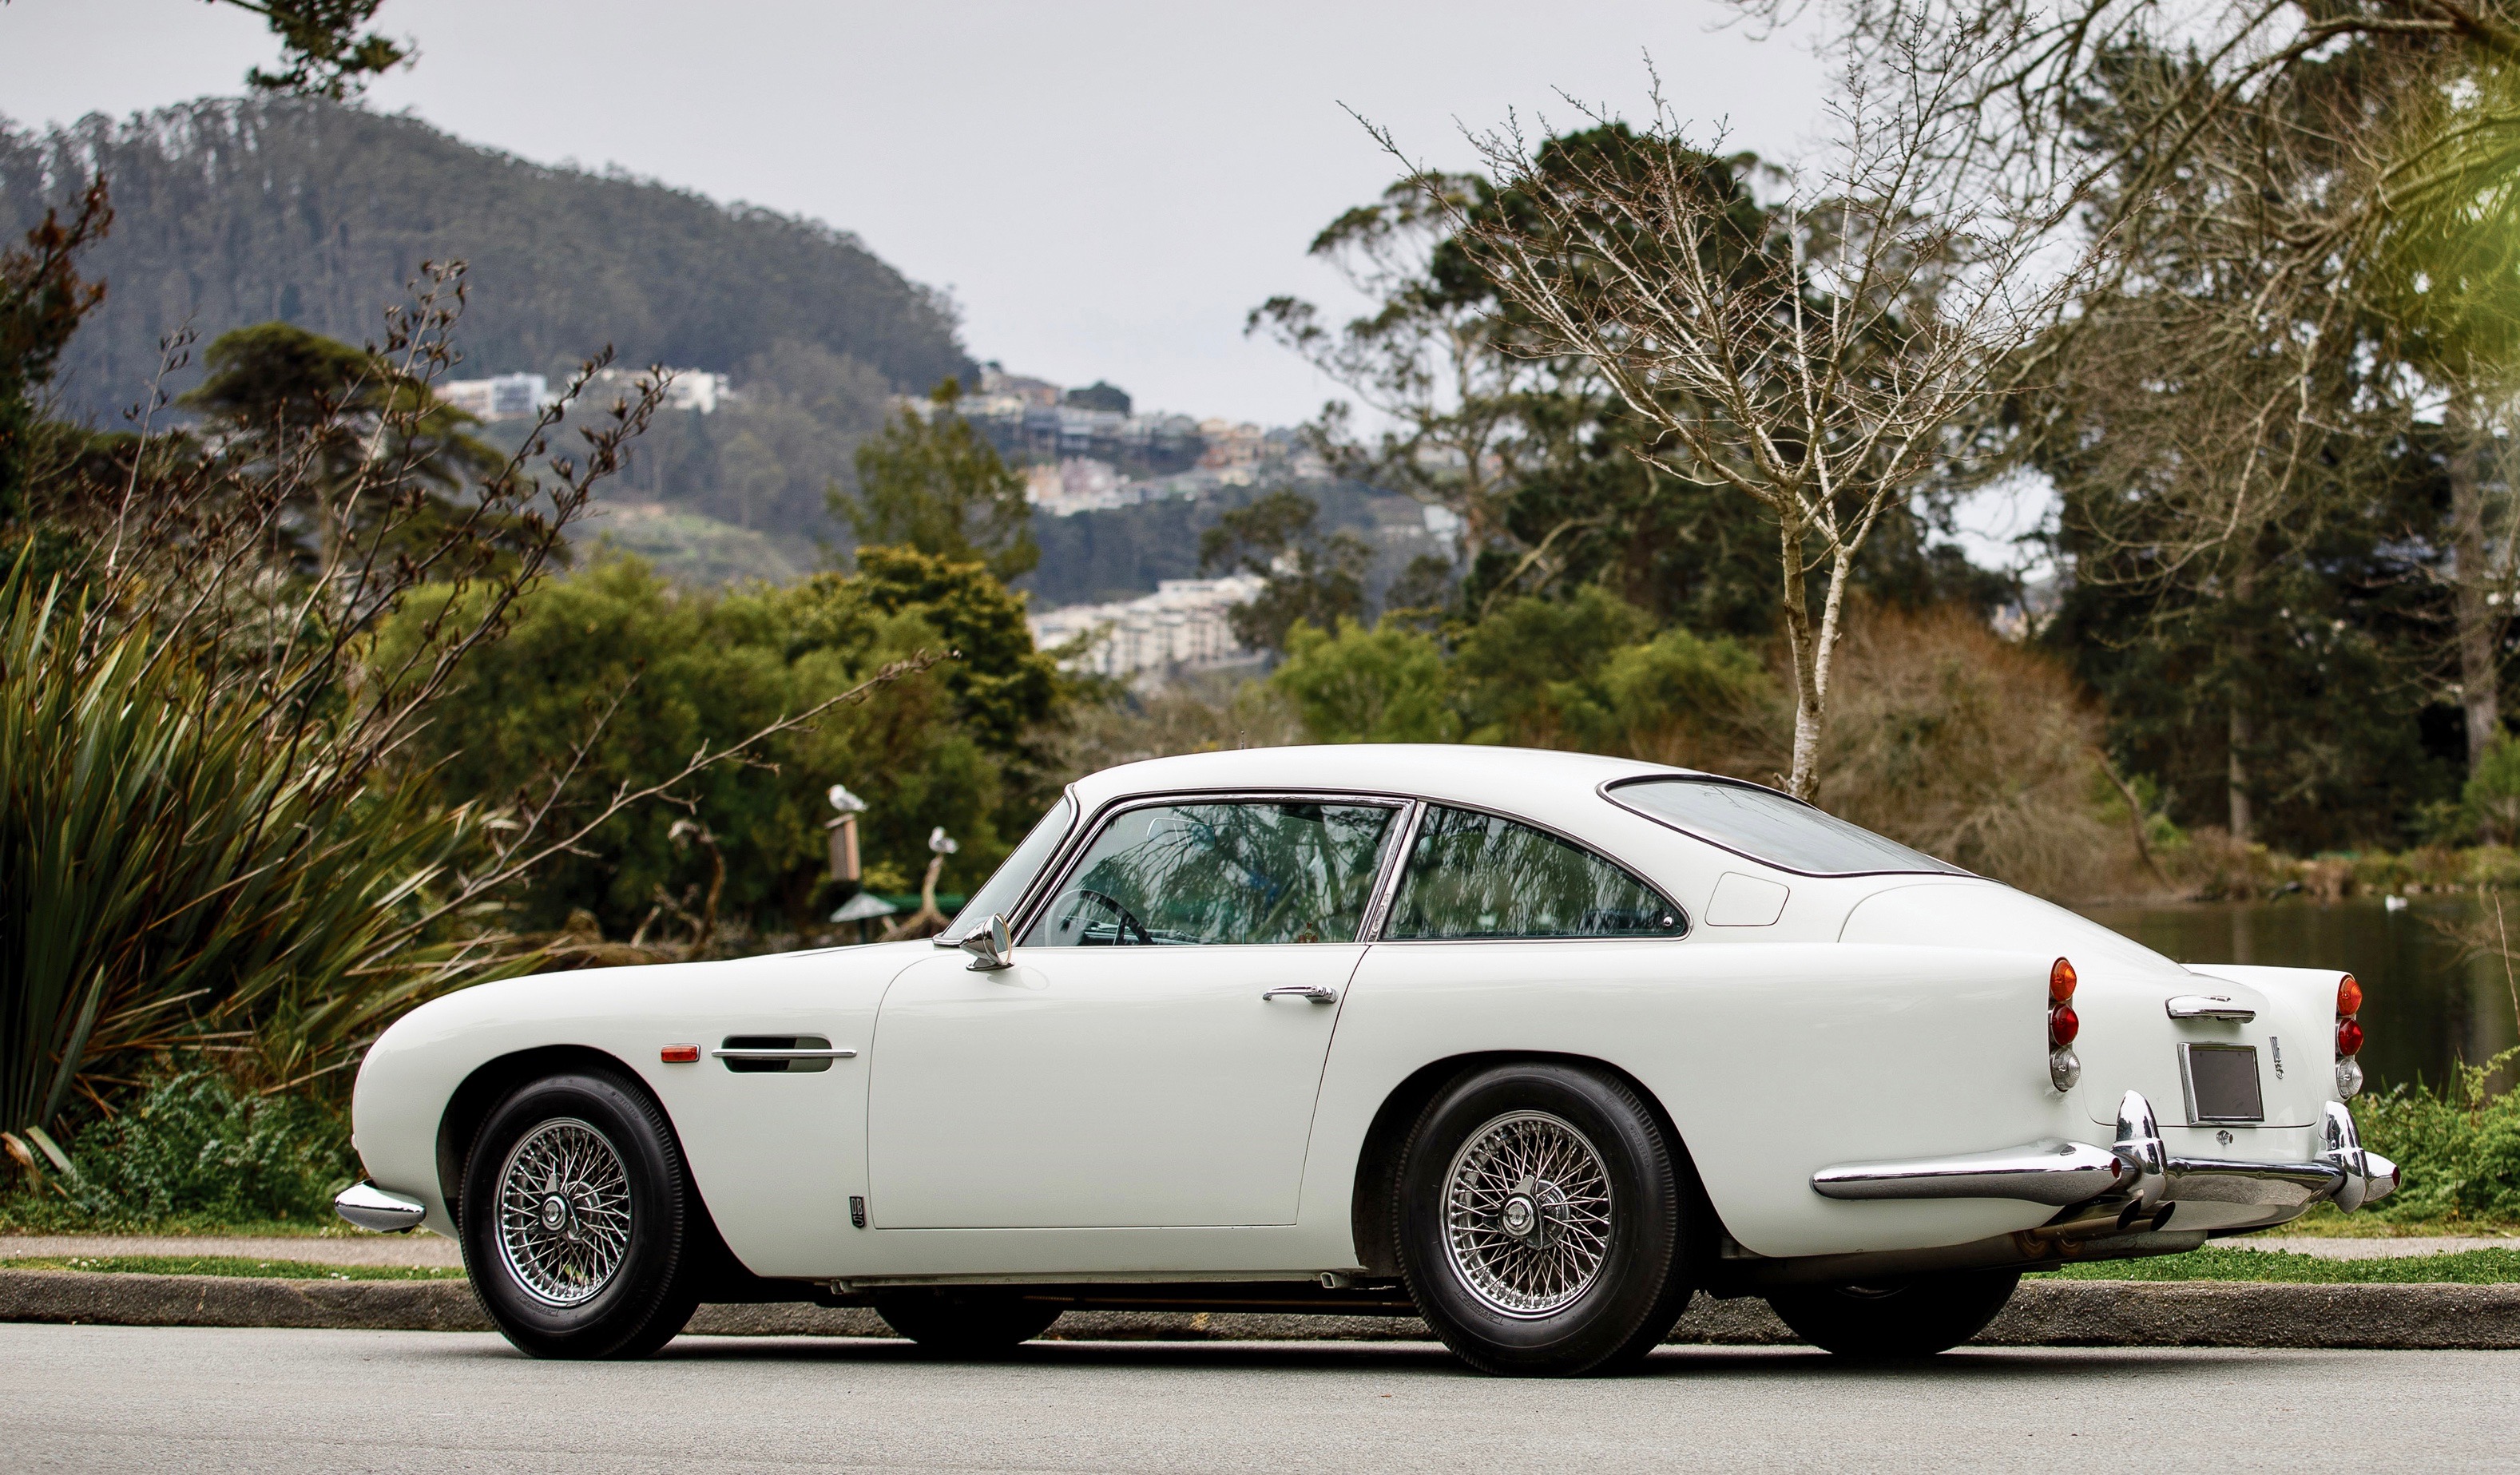 Monterey, RM Sotheby’s adds Aston Martin single-marque sale to Monterey schedule, ClassicCars.com Journal